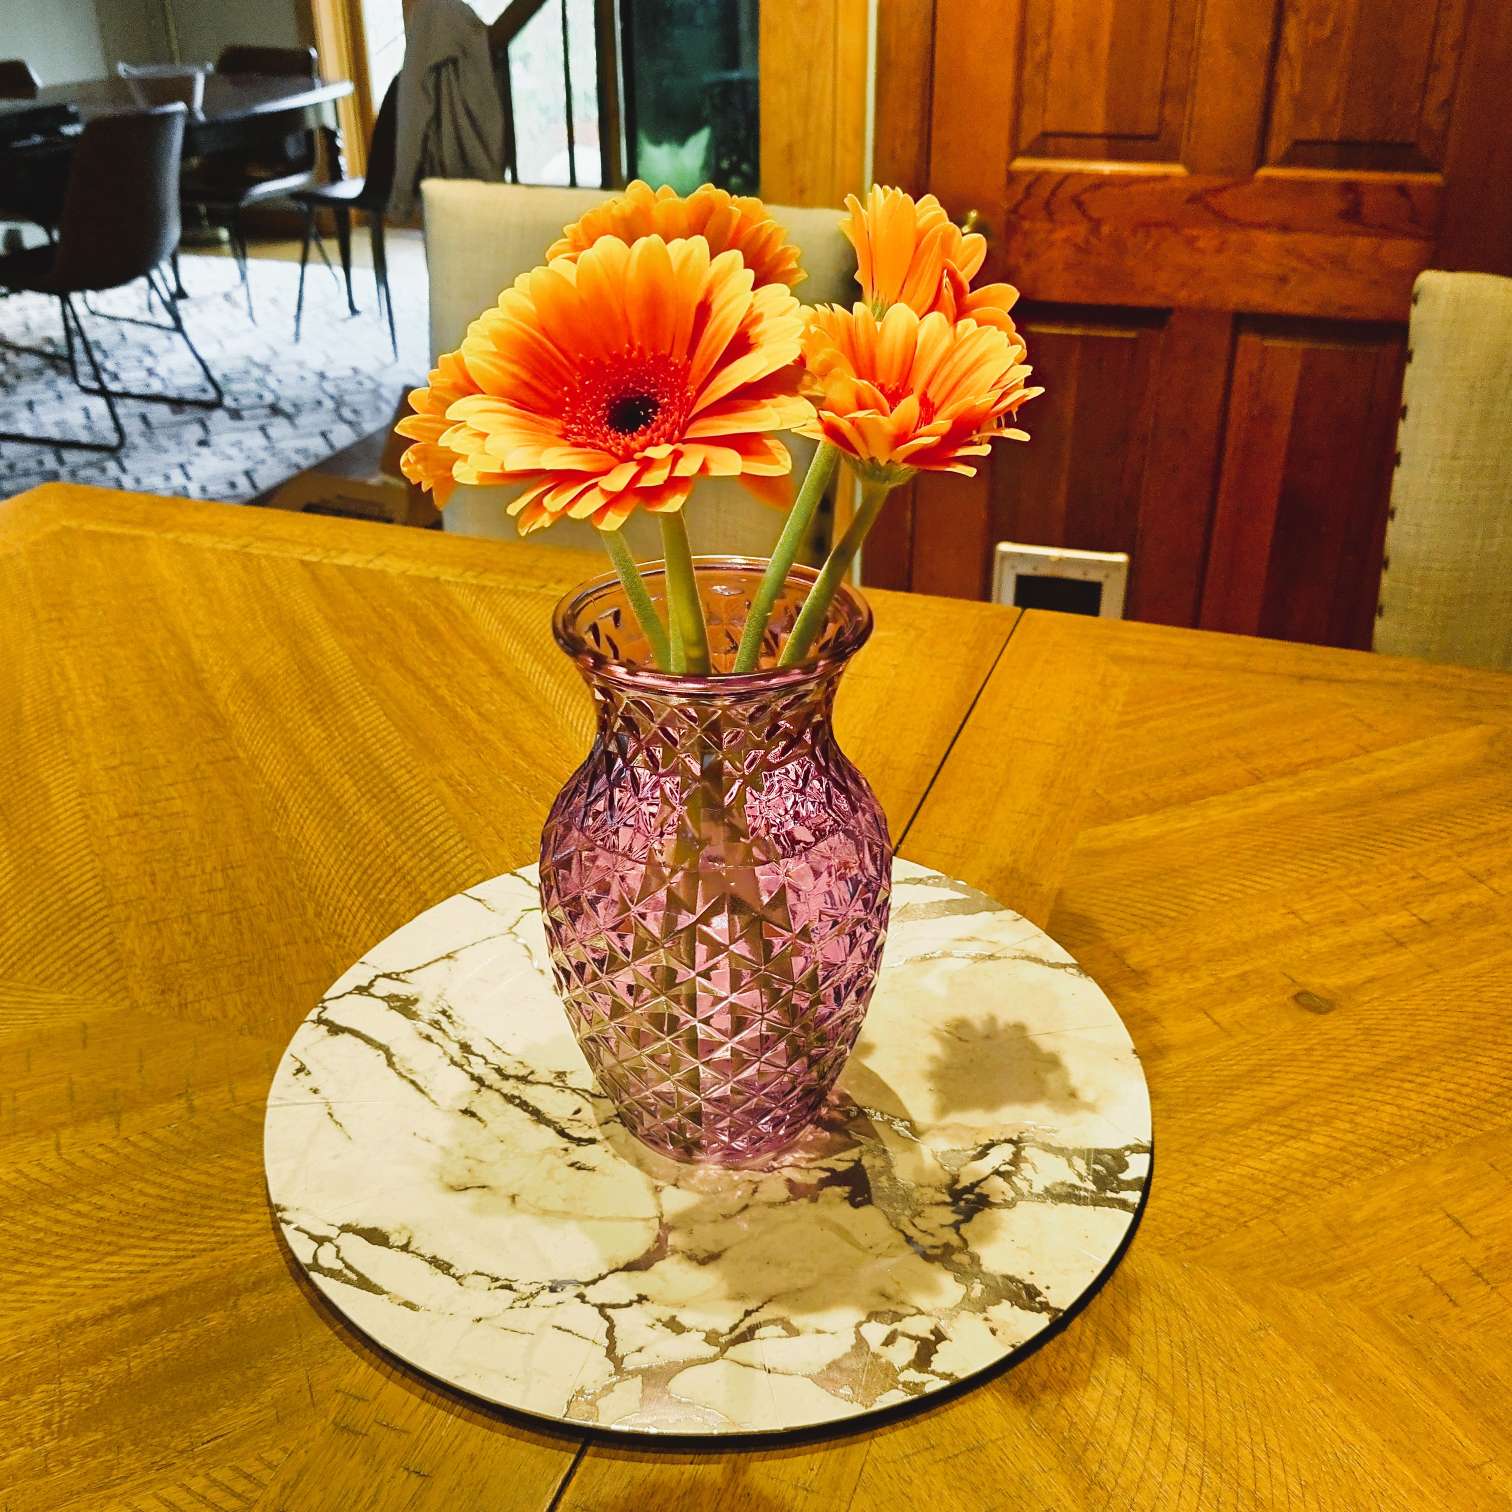 Purple vase with orange flowers on a wooden table